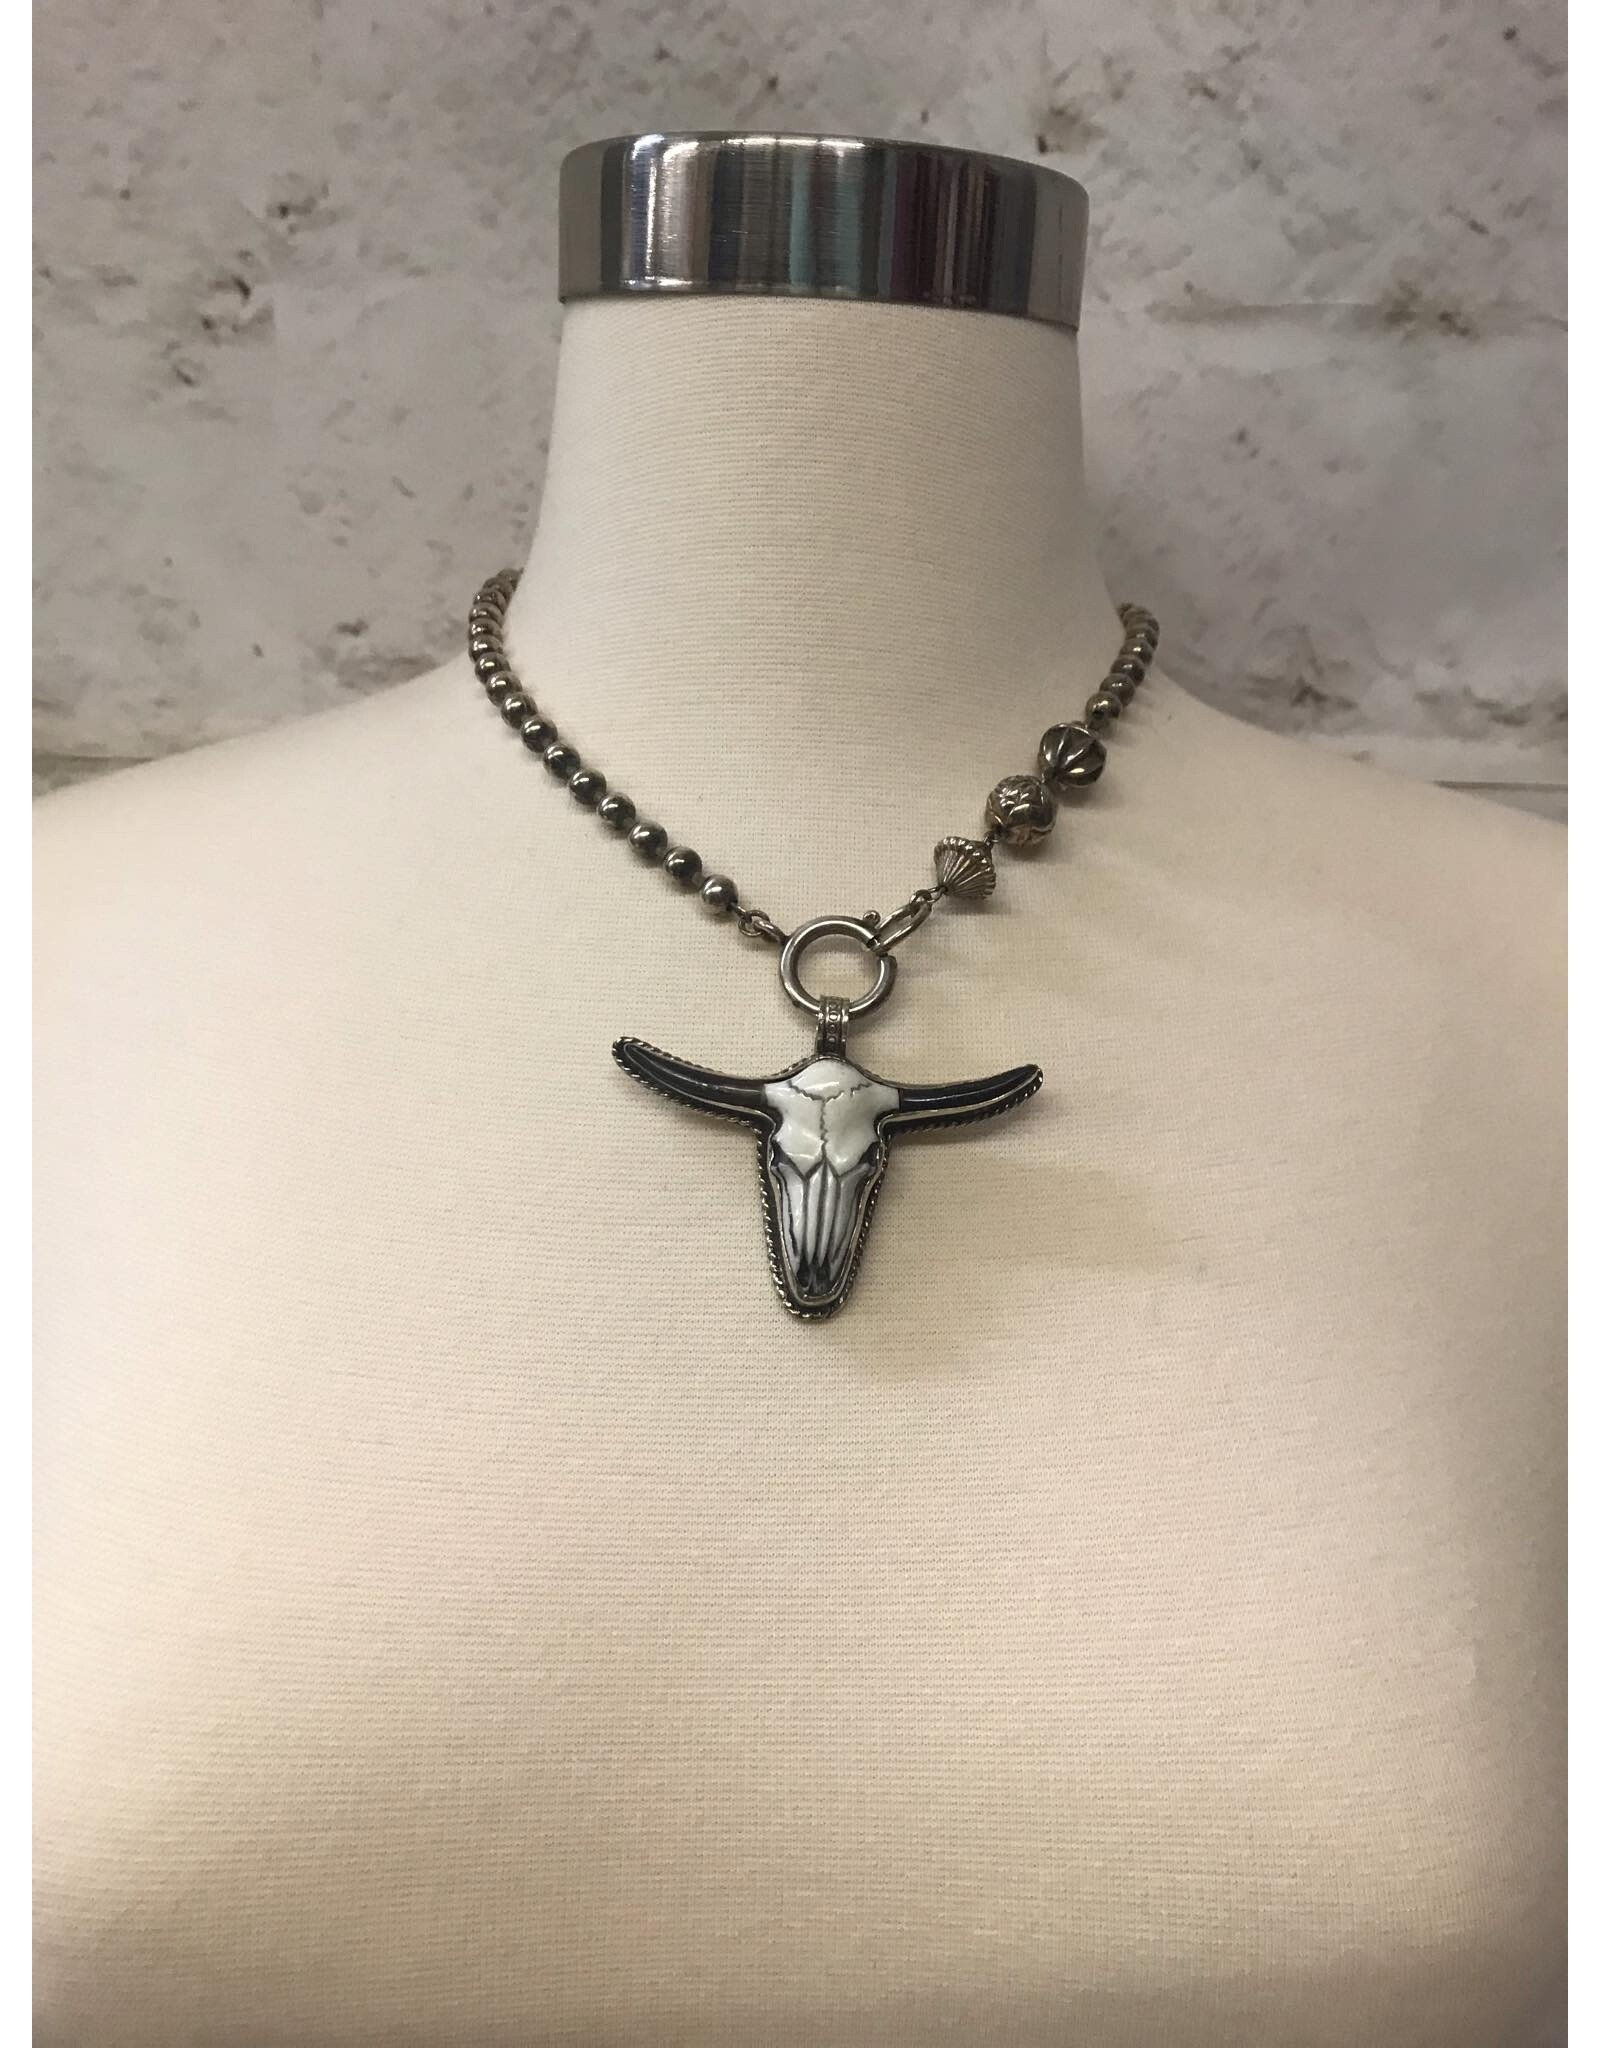 Erin Knight Designs Vintage Bone Longhorn Necklace with Beaded Chain